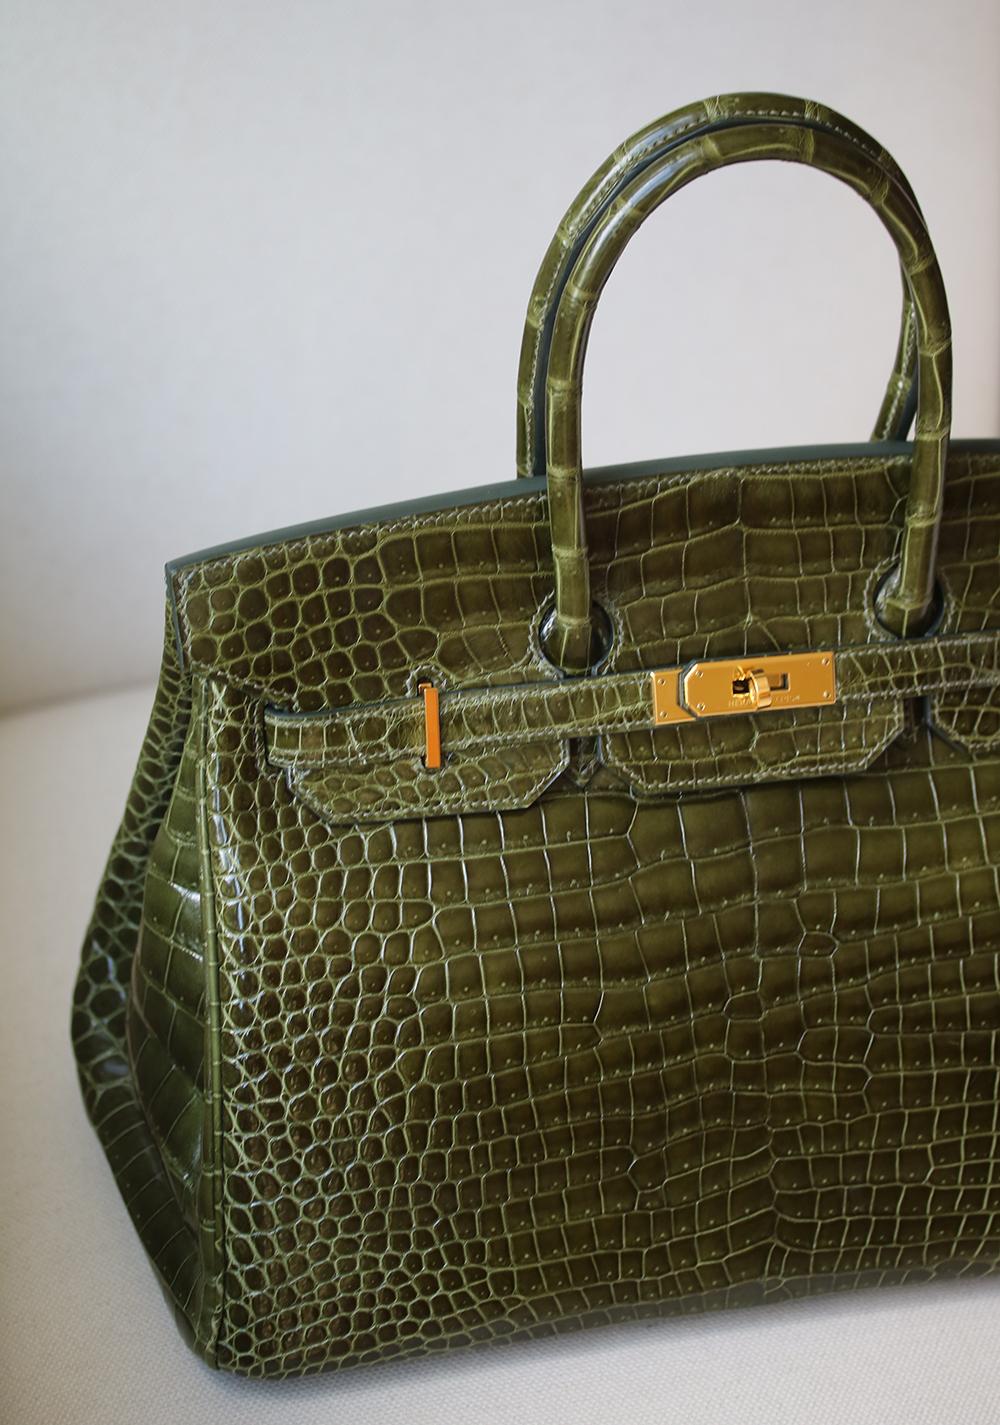 Hermès Vert Smooth Porosus Crocodile 35 cm Birkin Bag with Gold Hardware. The most fabulous of all bags can be yours today! Luxuriously rich coloured with tonal top stitching. This Birkin is in excellent condition. Only lightly used. Has been